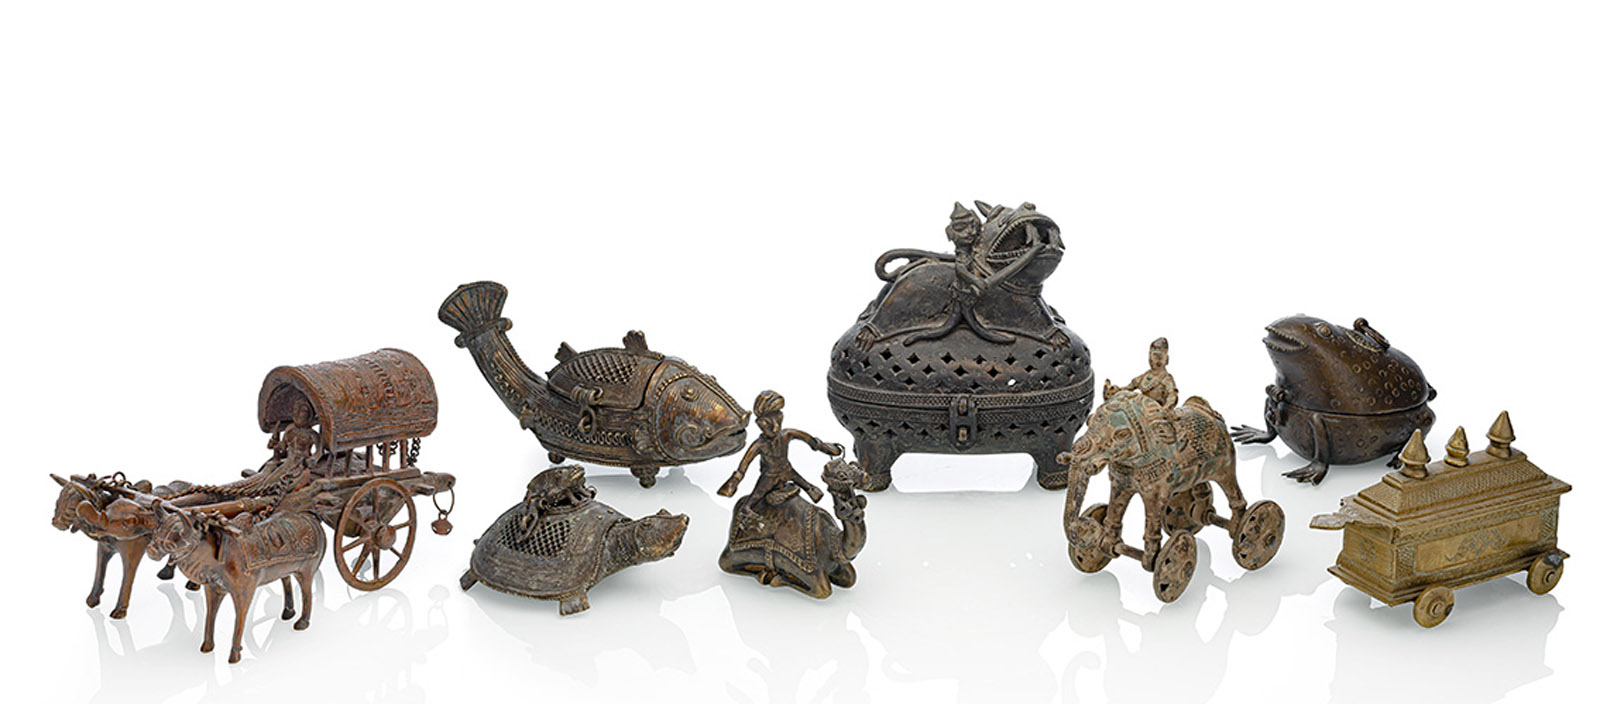 <b>A GROUP OF EIGHT BRONZE, COPPER AND BRASS OBJECTS, AMONG OTHER HINGED BOXES AND CARRIAGES IN ANIMAL SHAPE</b>